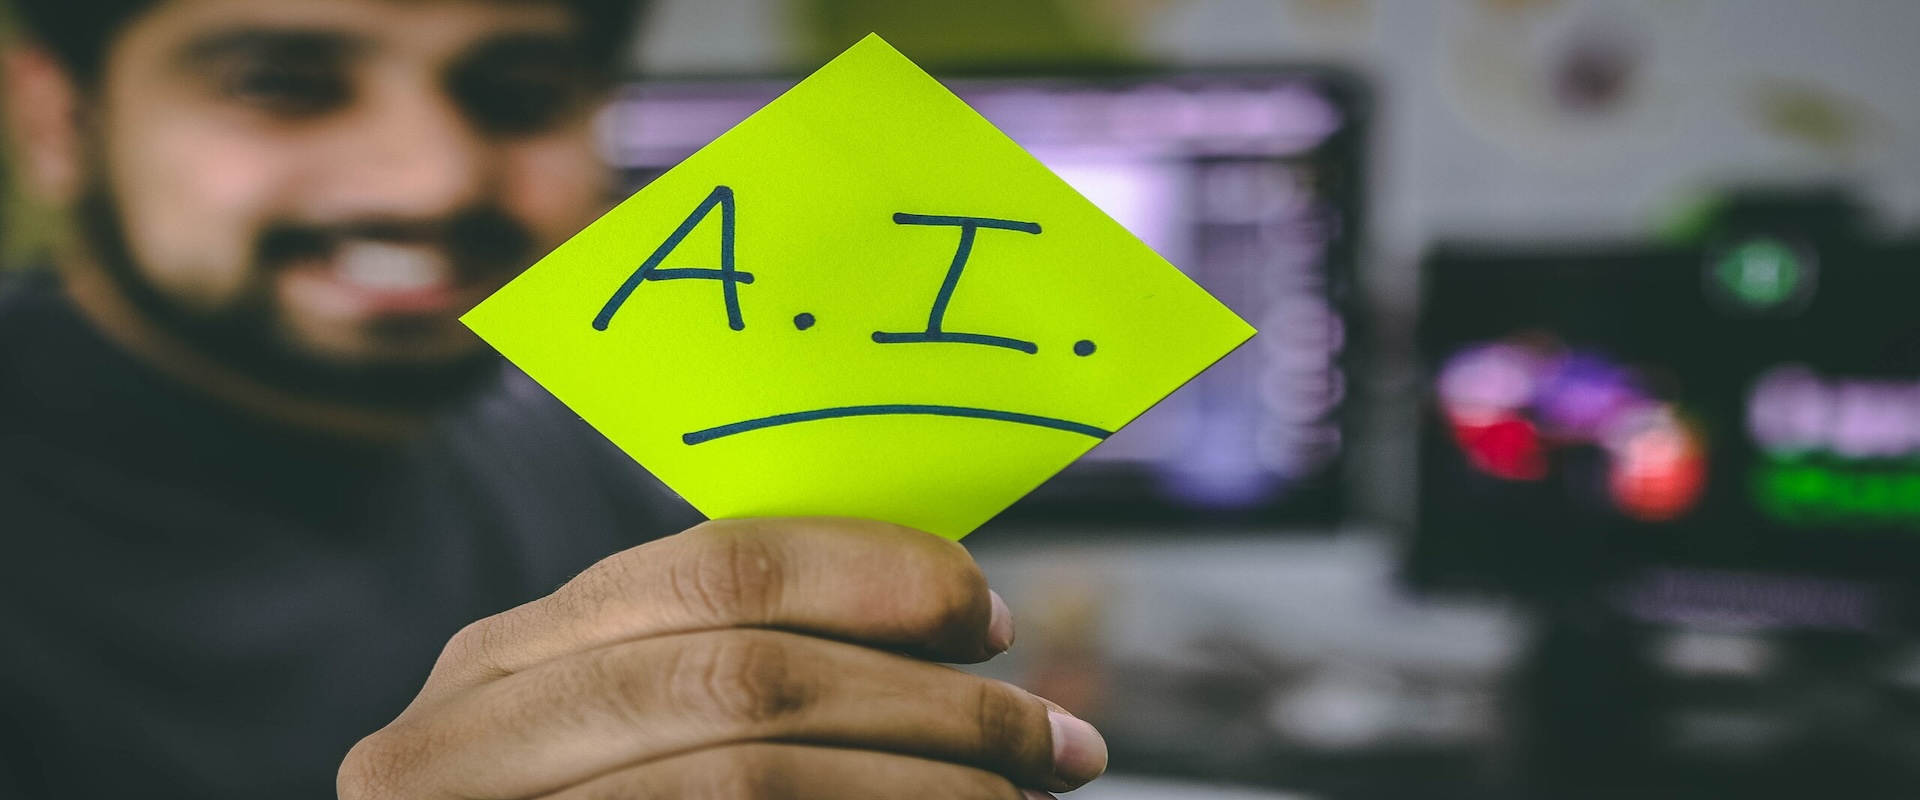 A smiling young man in the background is holding up a yellow post it note with the letters AI written on it.